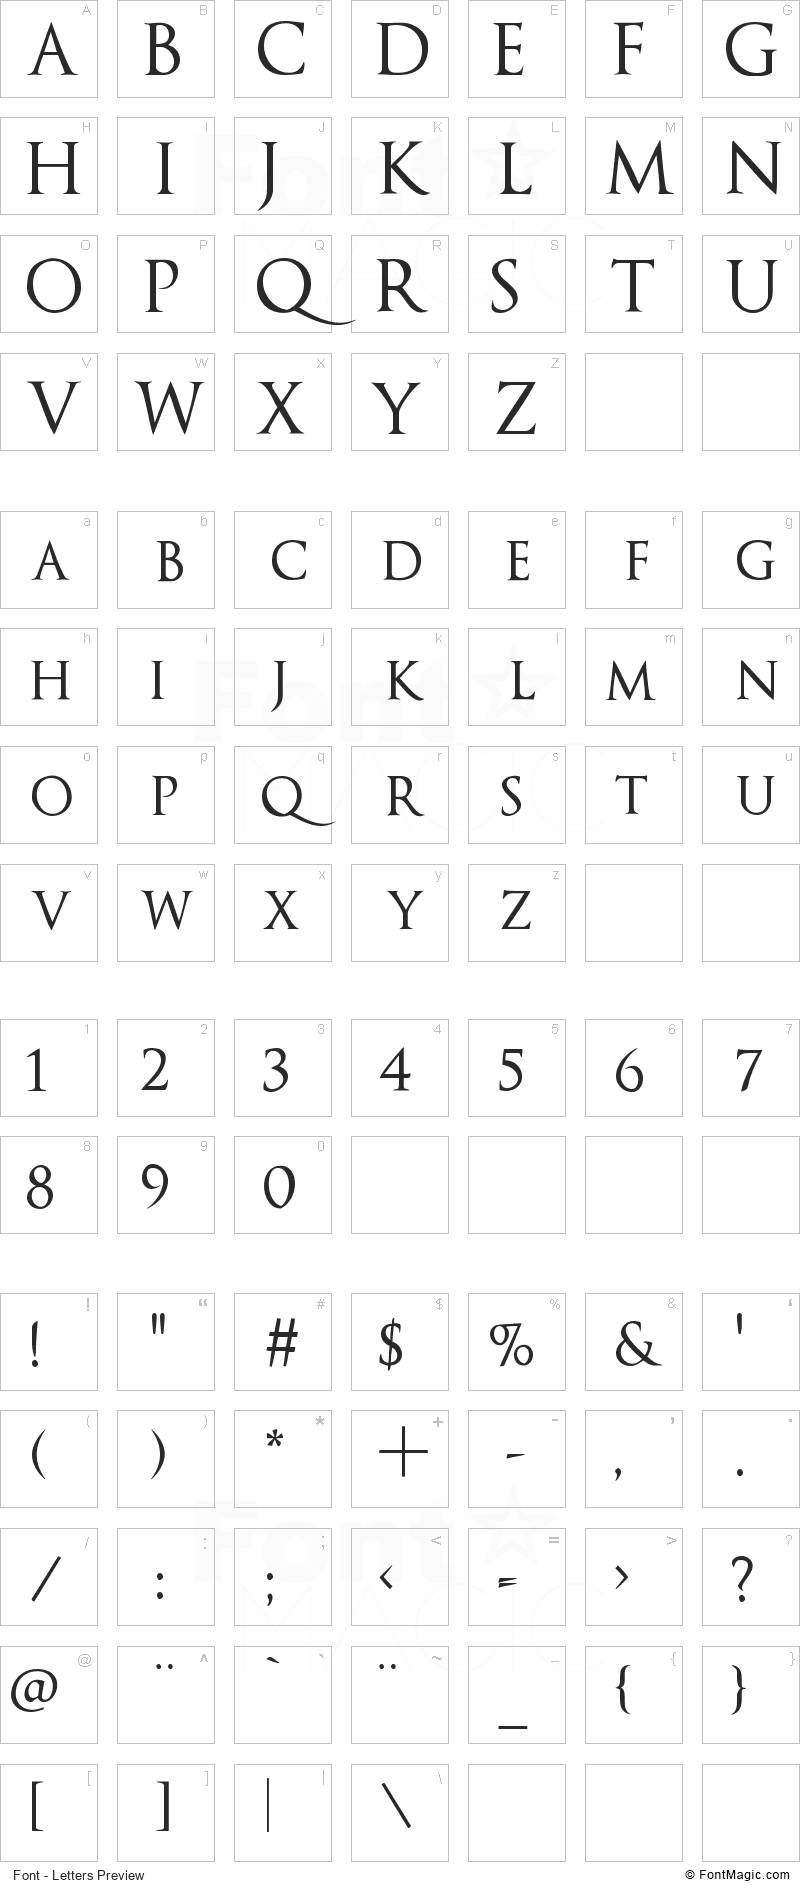 Optimus Princeps Font - All Latters Preview Chart